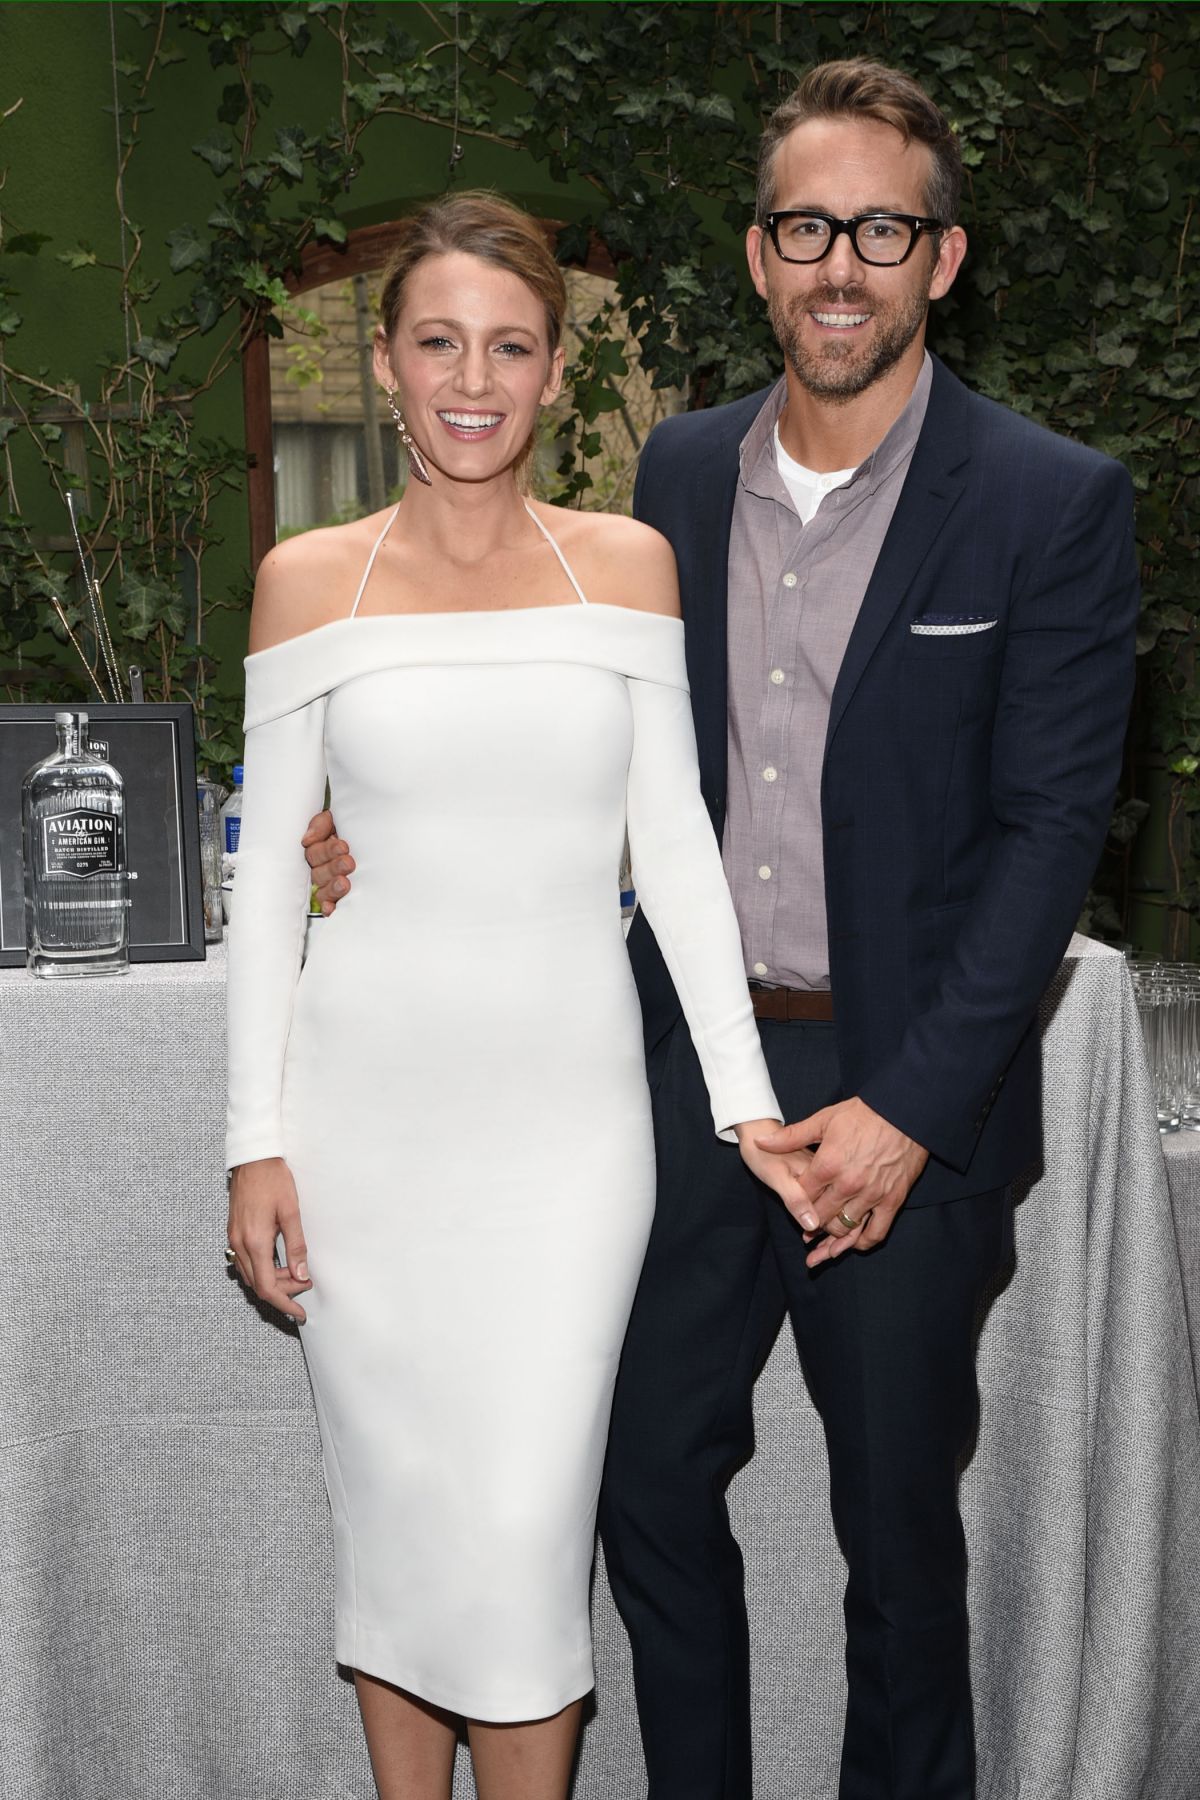 BLAKE LIVELY and Ryan Reynolds Celebrate His First Employee Orientation as Wwner of Aviation Gin ...